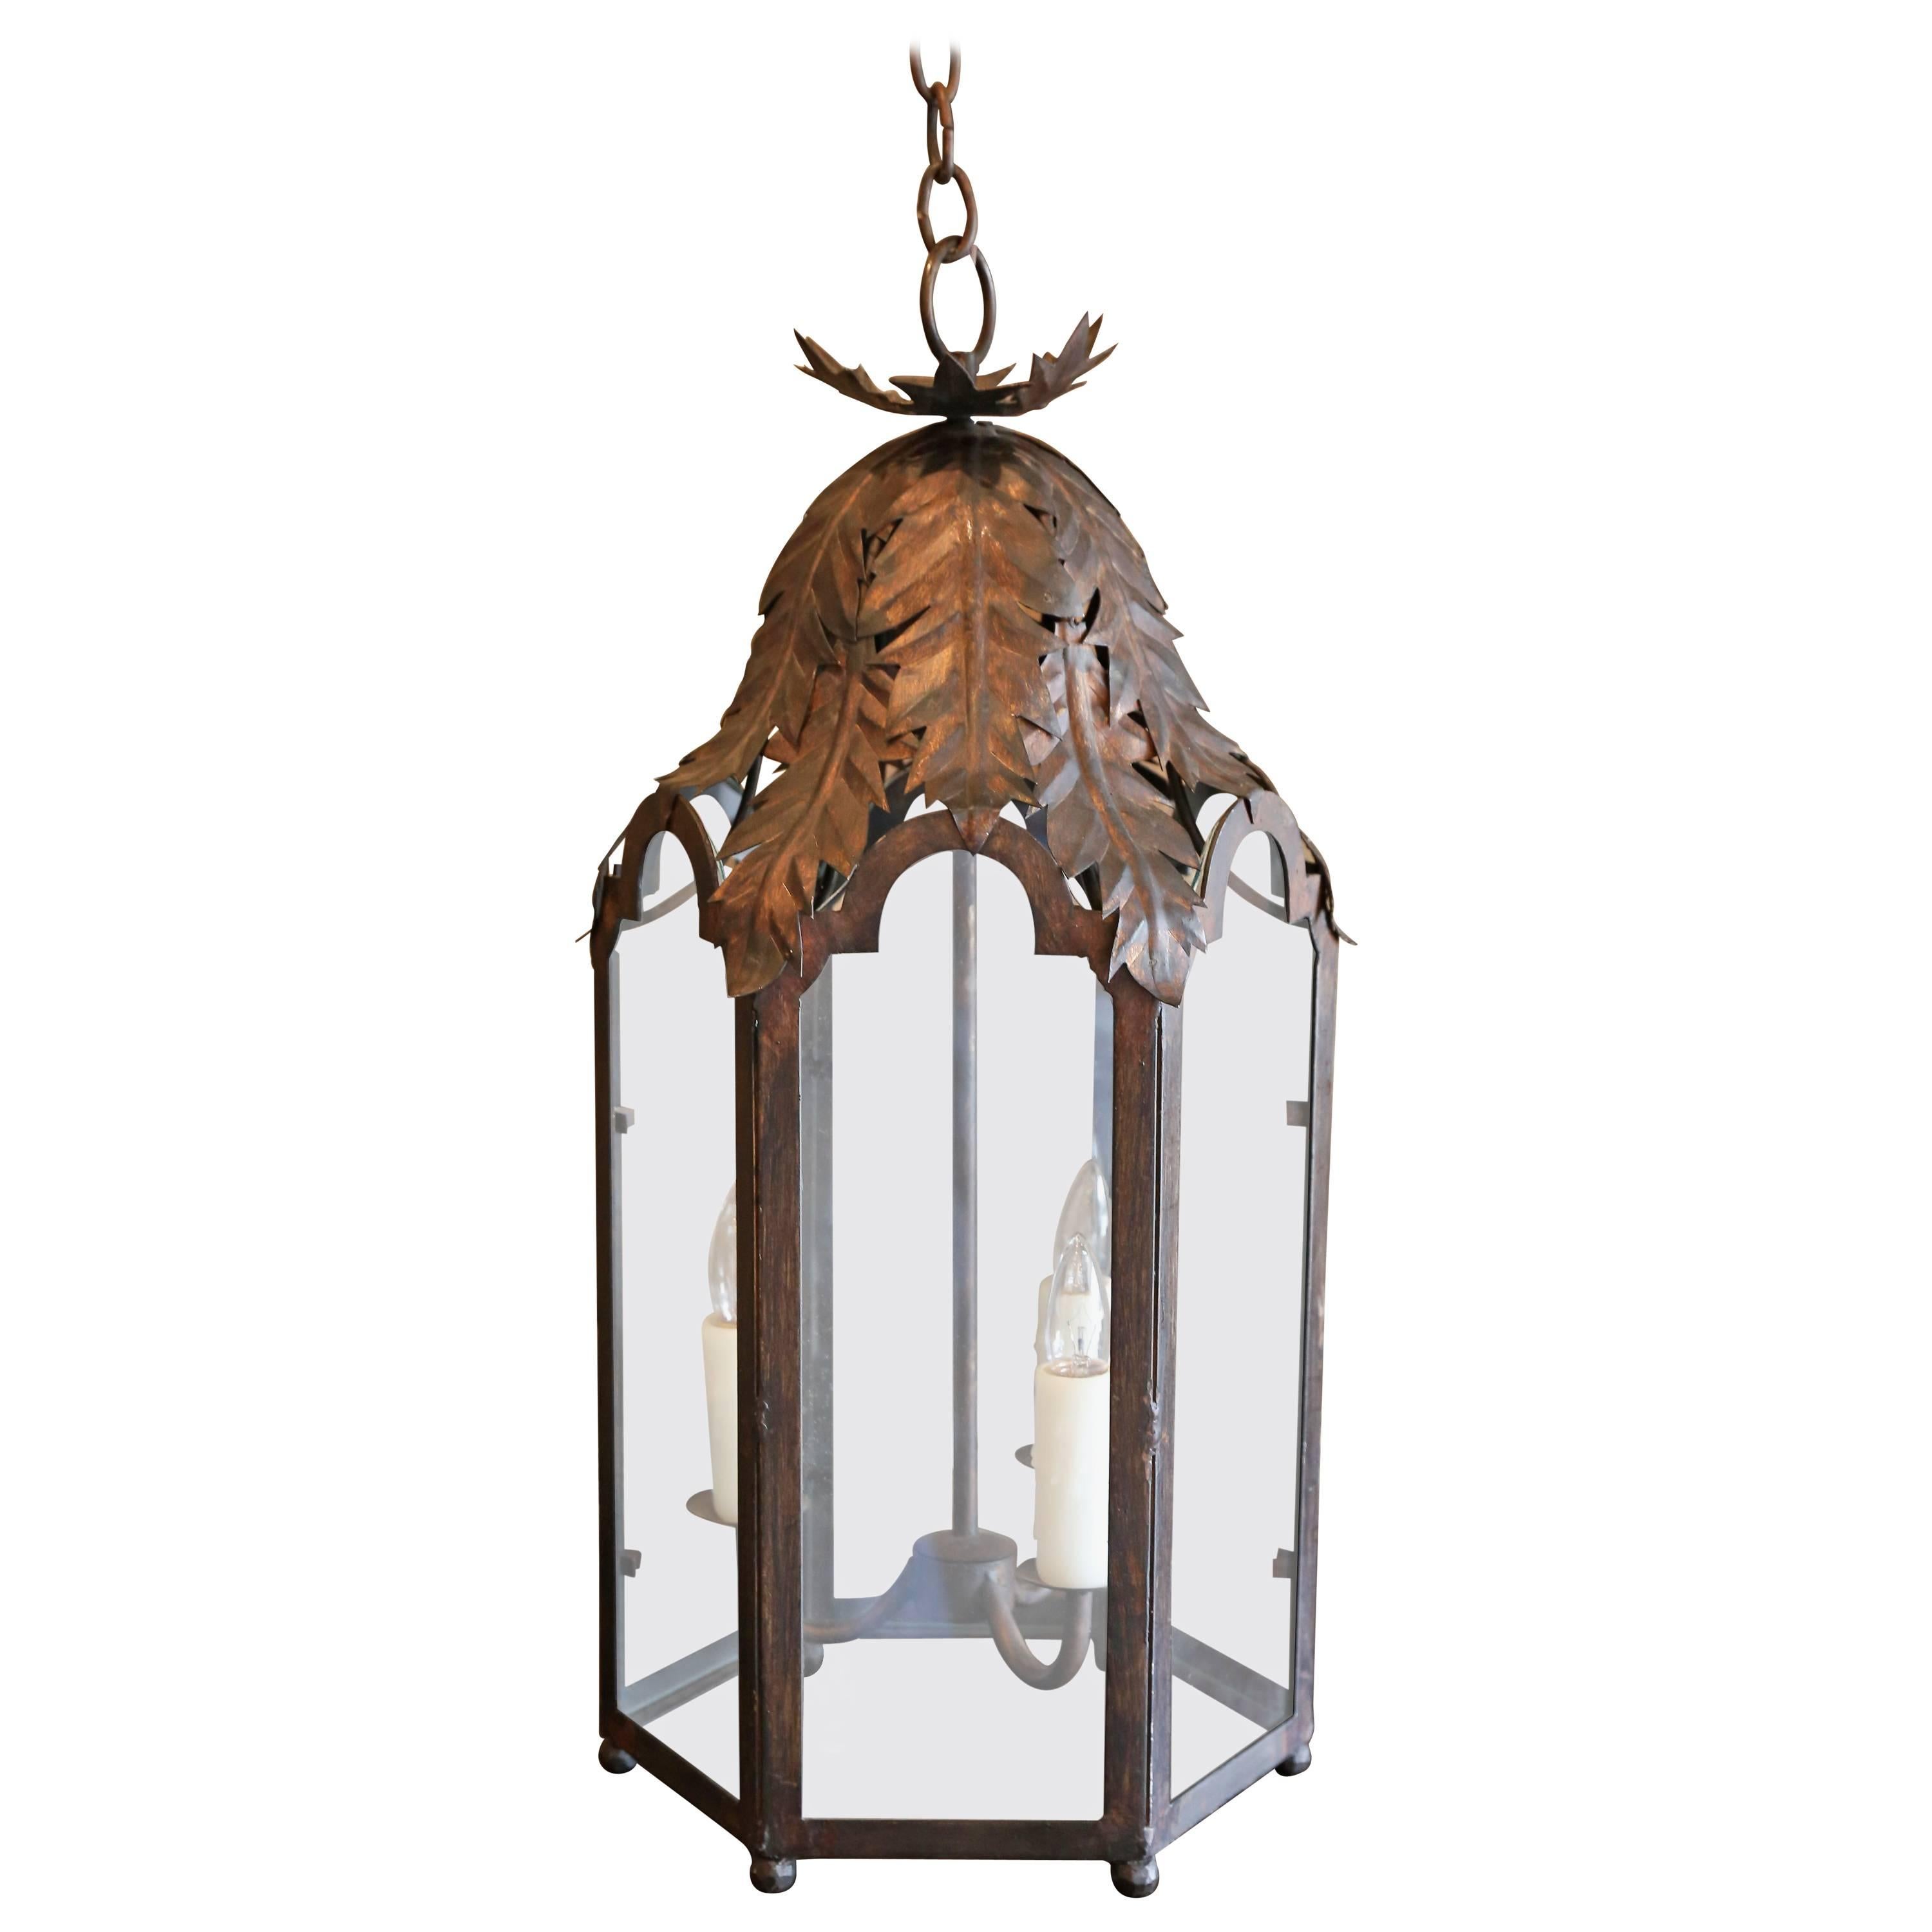 Two Italian style iron lanterns, six-sided tole and iron frames with glass panels and acanthus leaf decoration. Newly-wired for use within the USA and includes chain and canopies. Sold separately and priced $2,100 each.